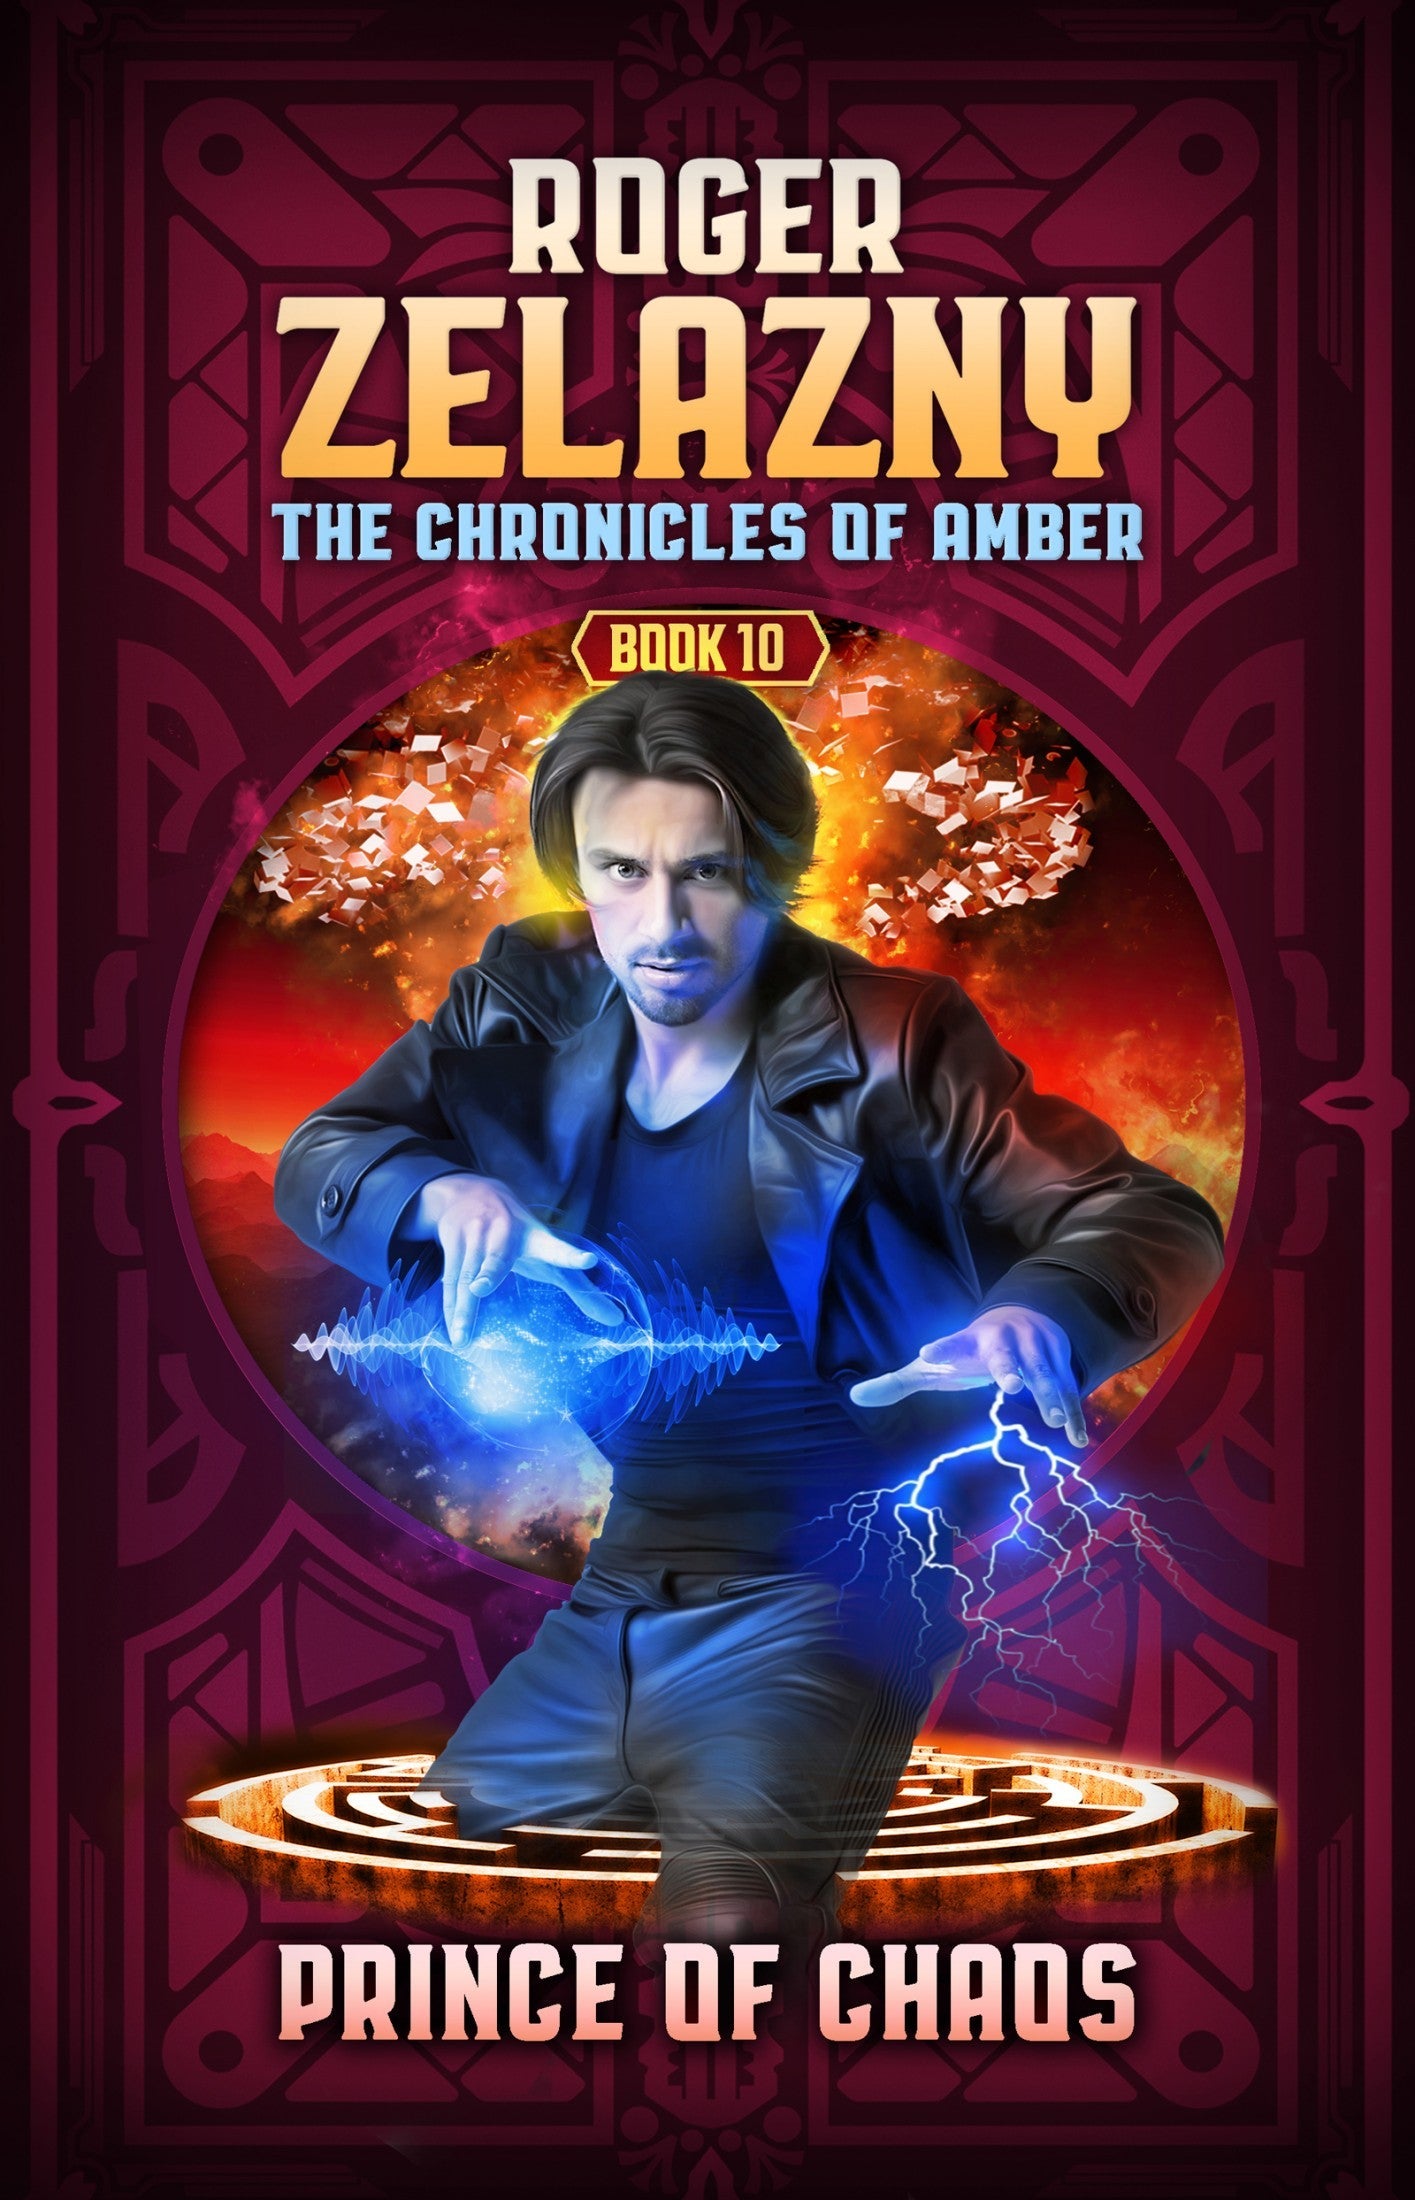 Cover art for Prince of Chaos, the tenth book in acclaimed science fiction writer Rodger Zelazny's high fantasy series, the Chronicles of Amber.